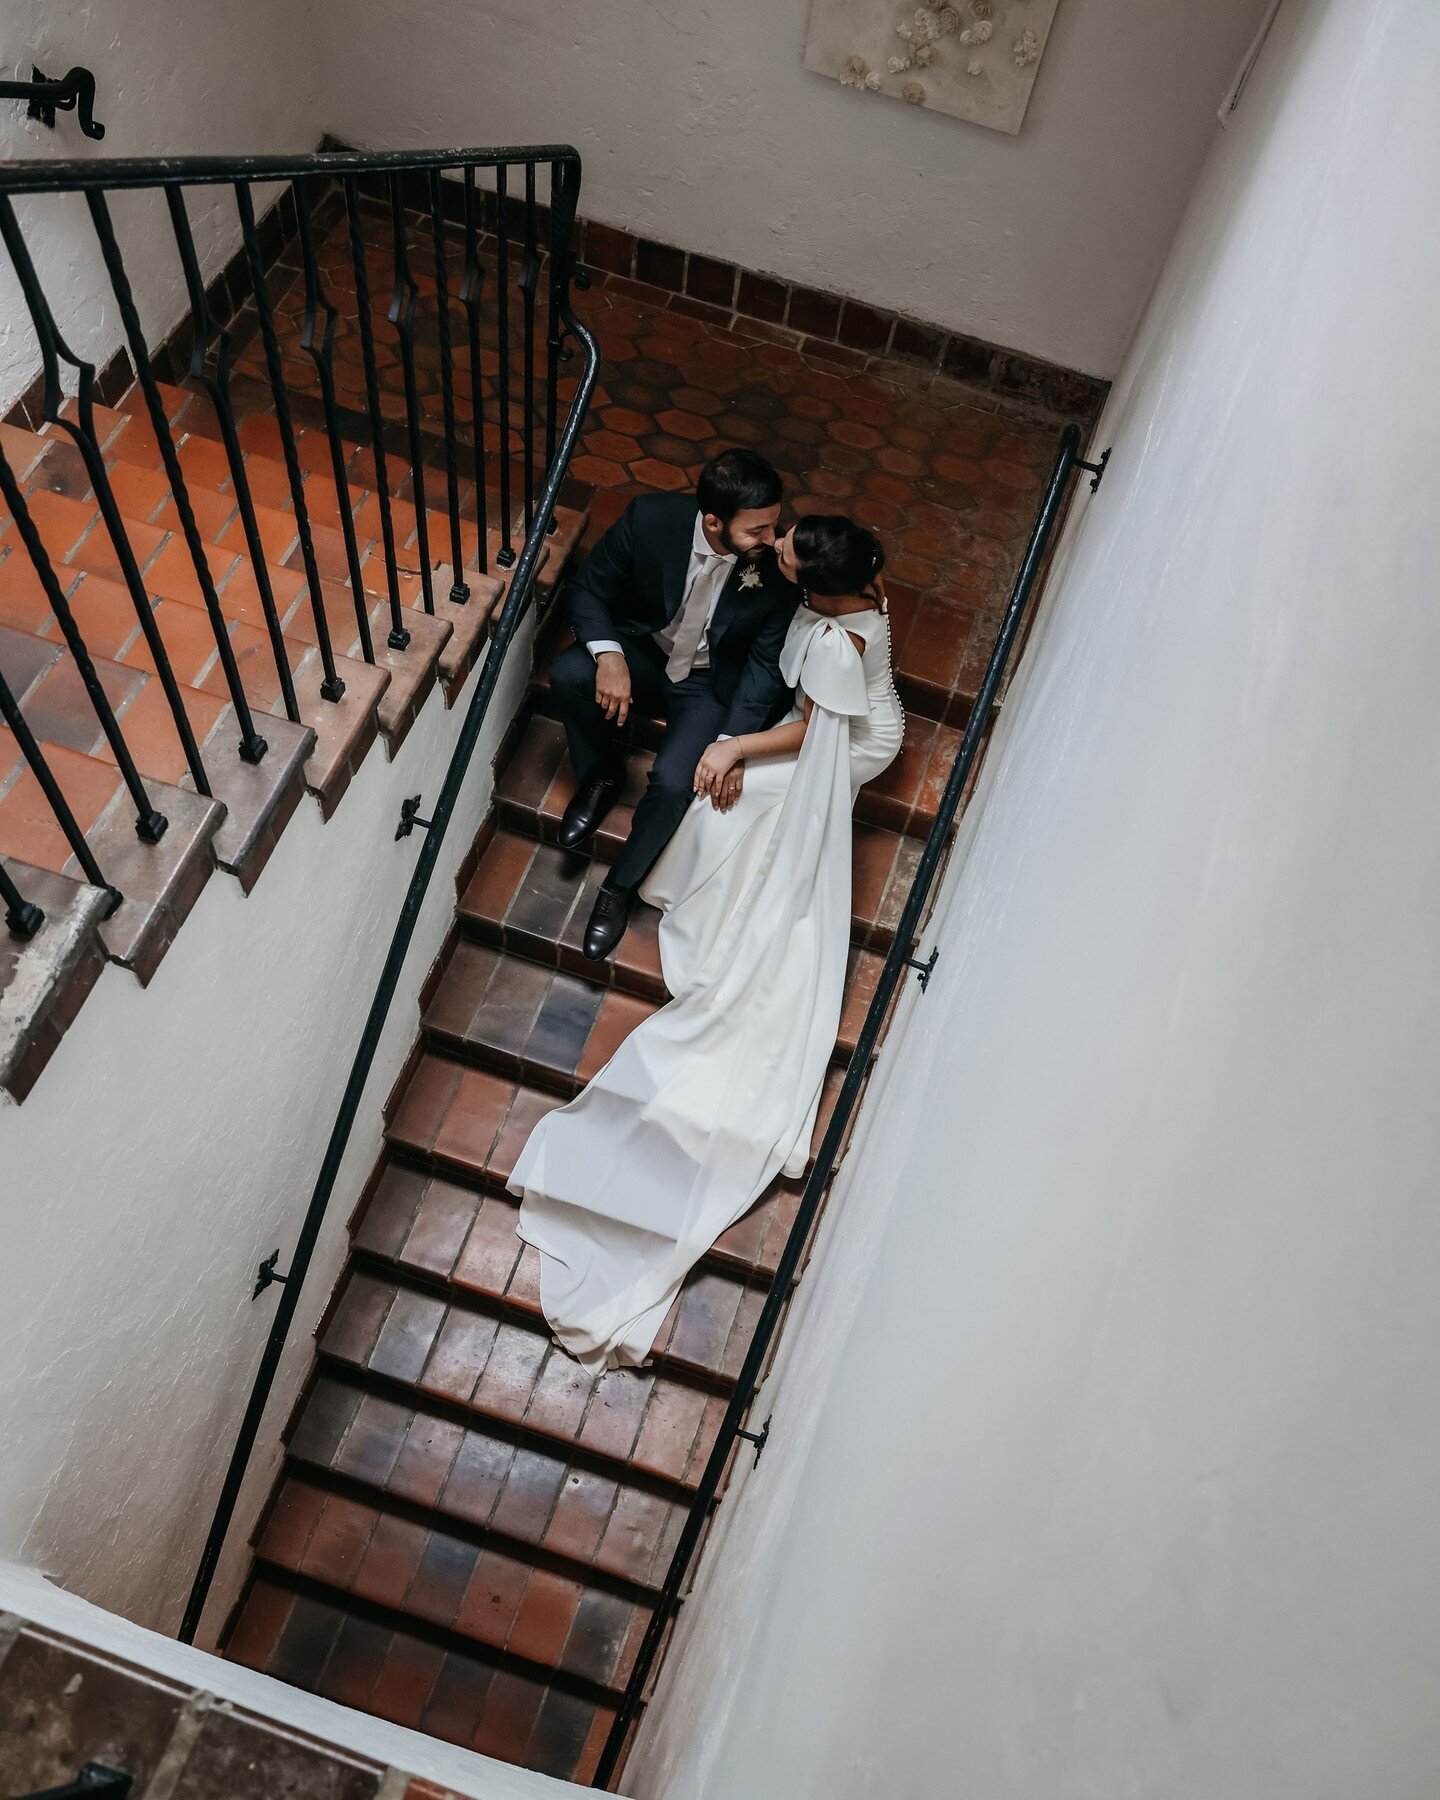 A romantic stairwell moment at our Chattanooga House
📸: @caseyyo